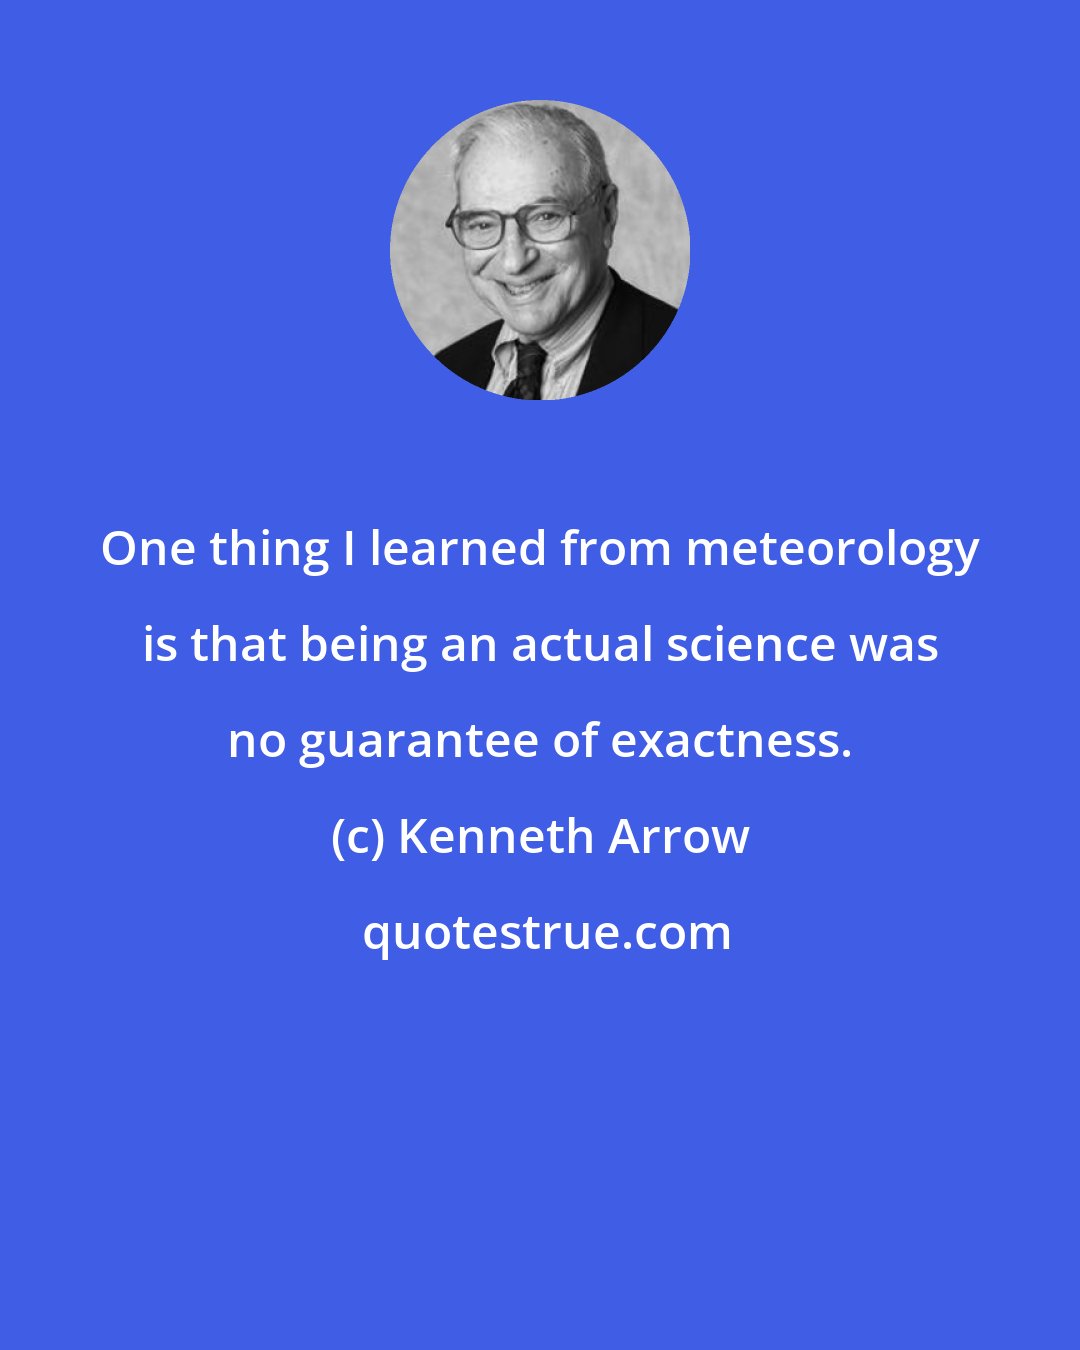 Kenneth Arrow: One thing I learned from meteorology is that being an actual science was no guarantee of exactness.